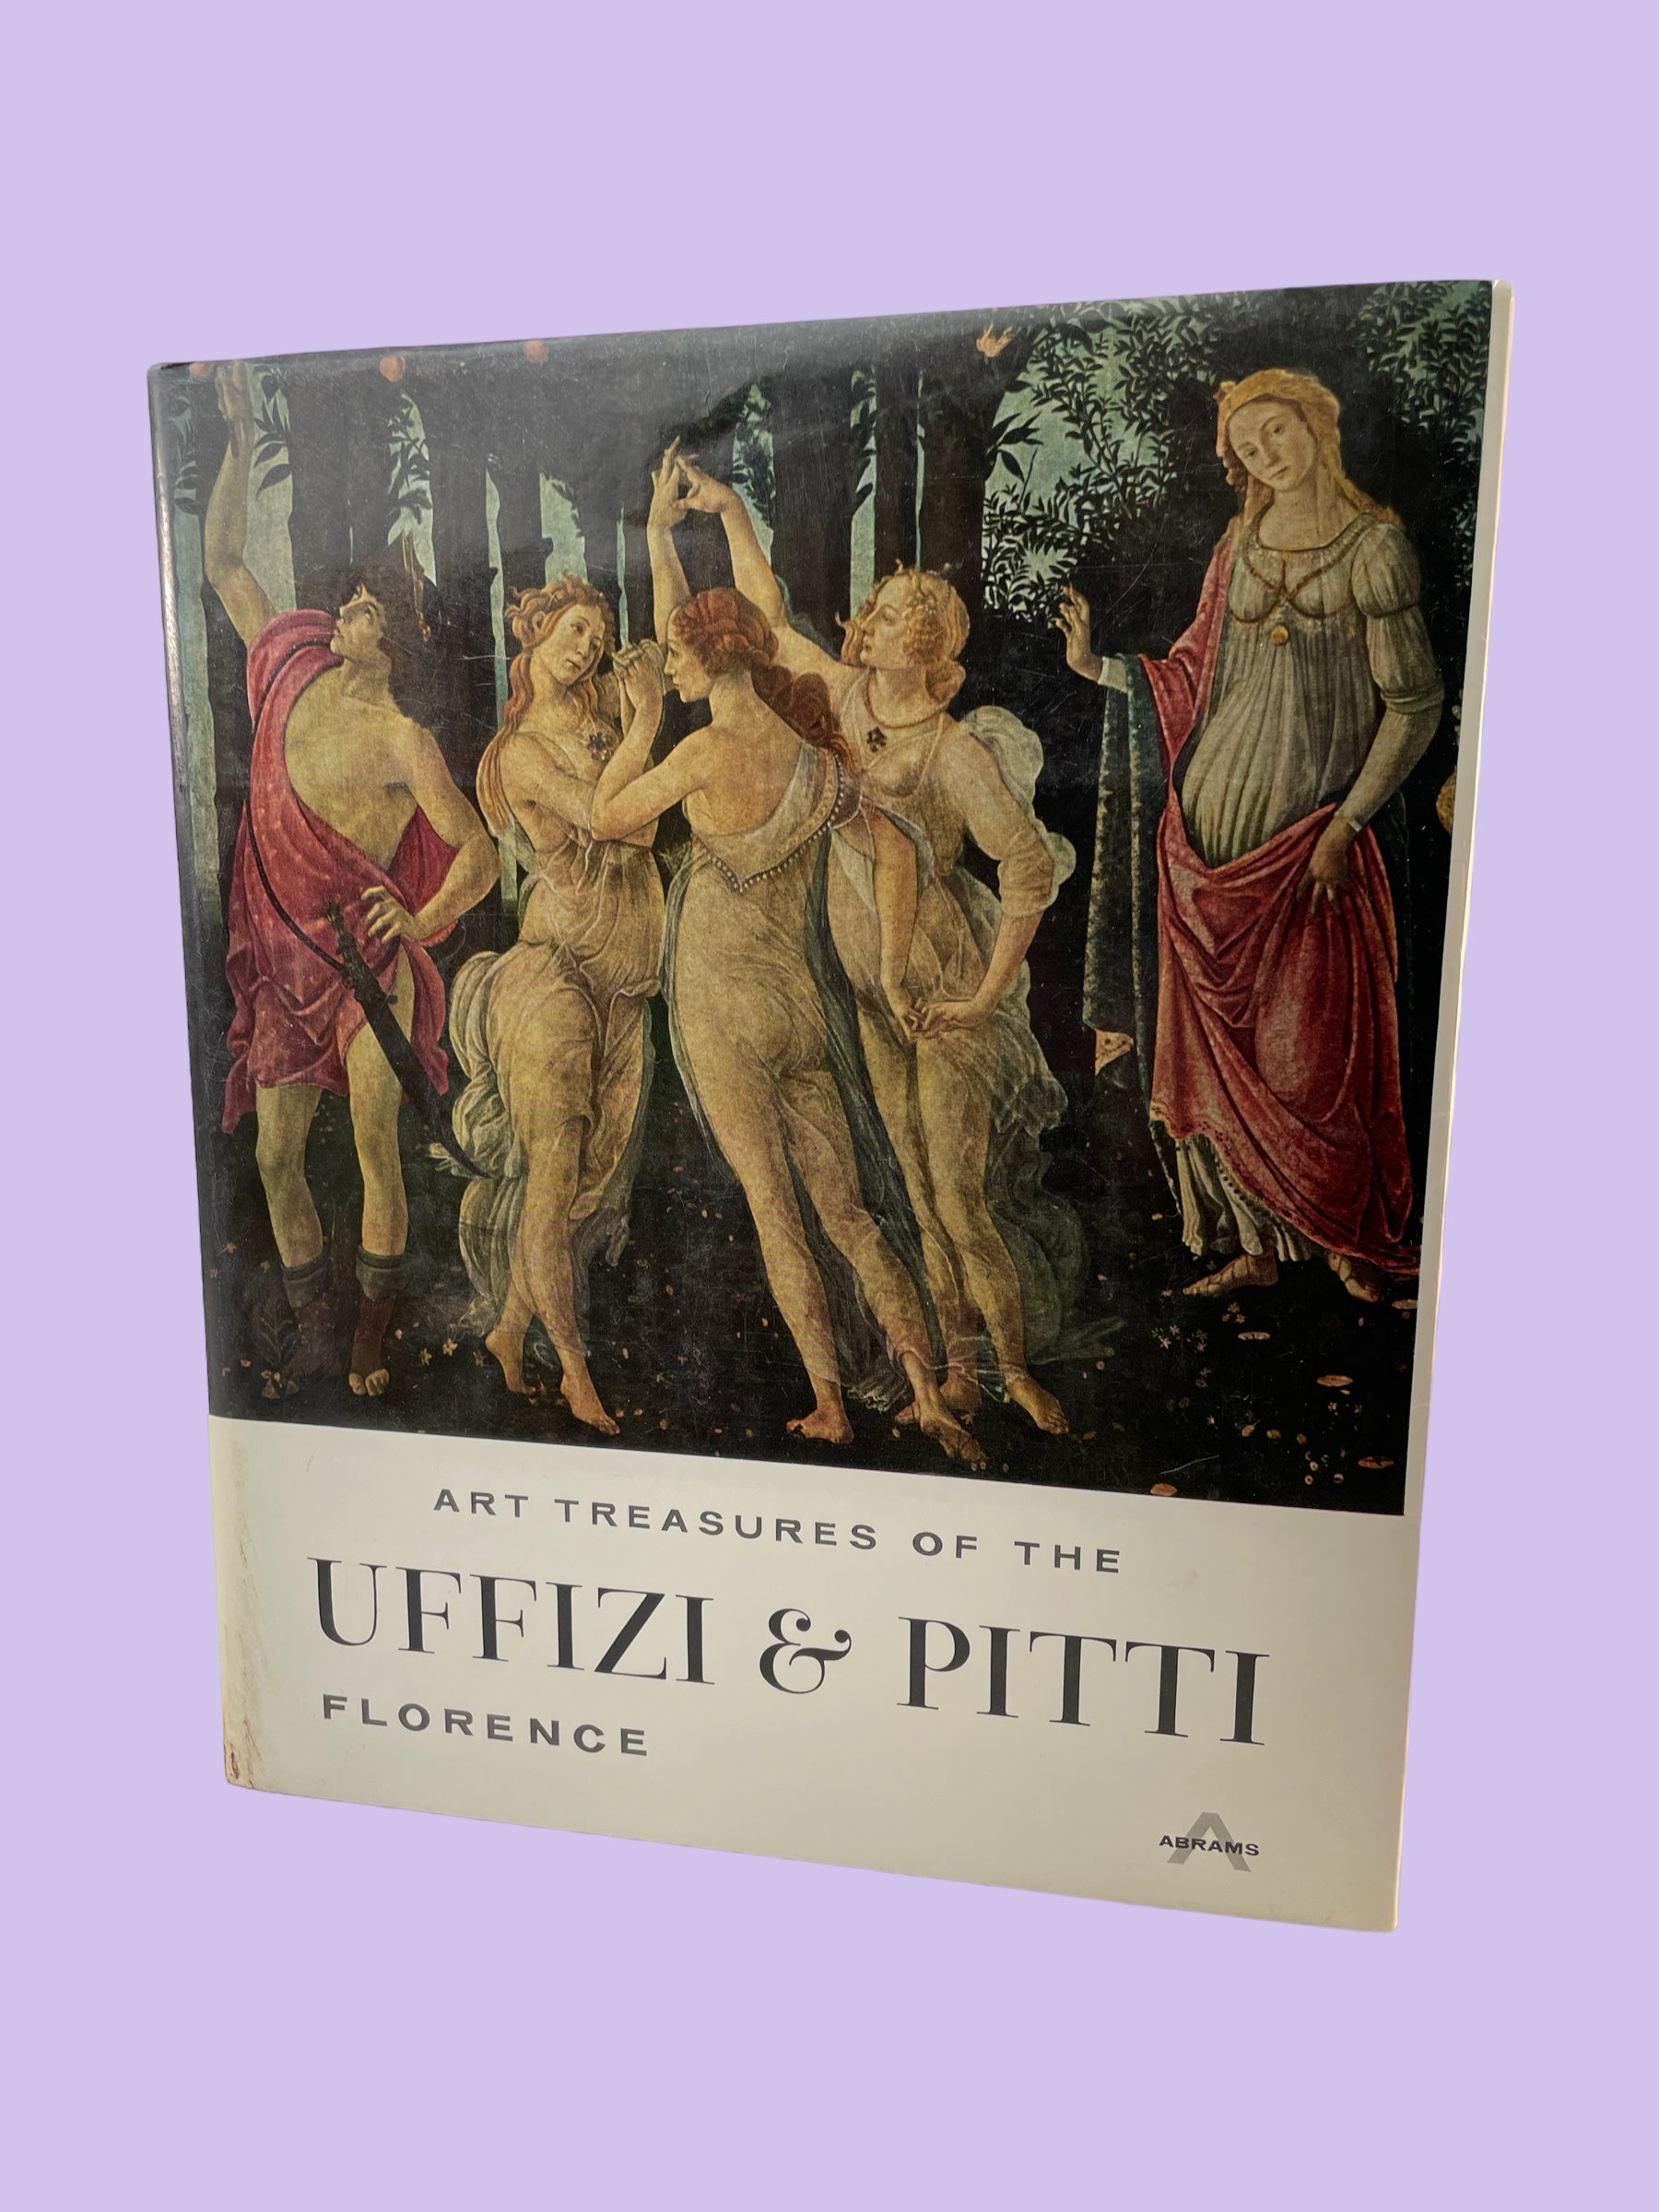 "Art Treasures of the Uffizi and Pitti Florence" by Filippo Rossi